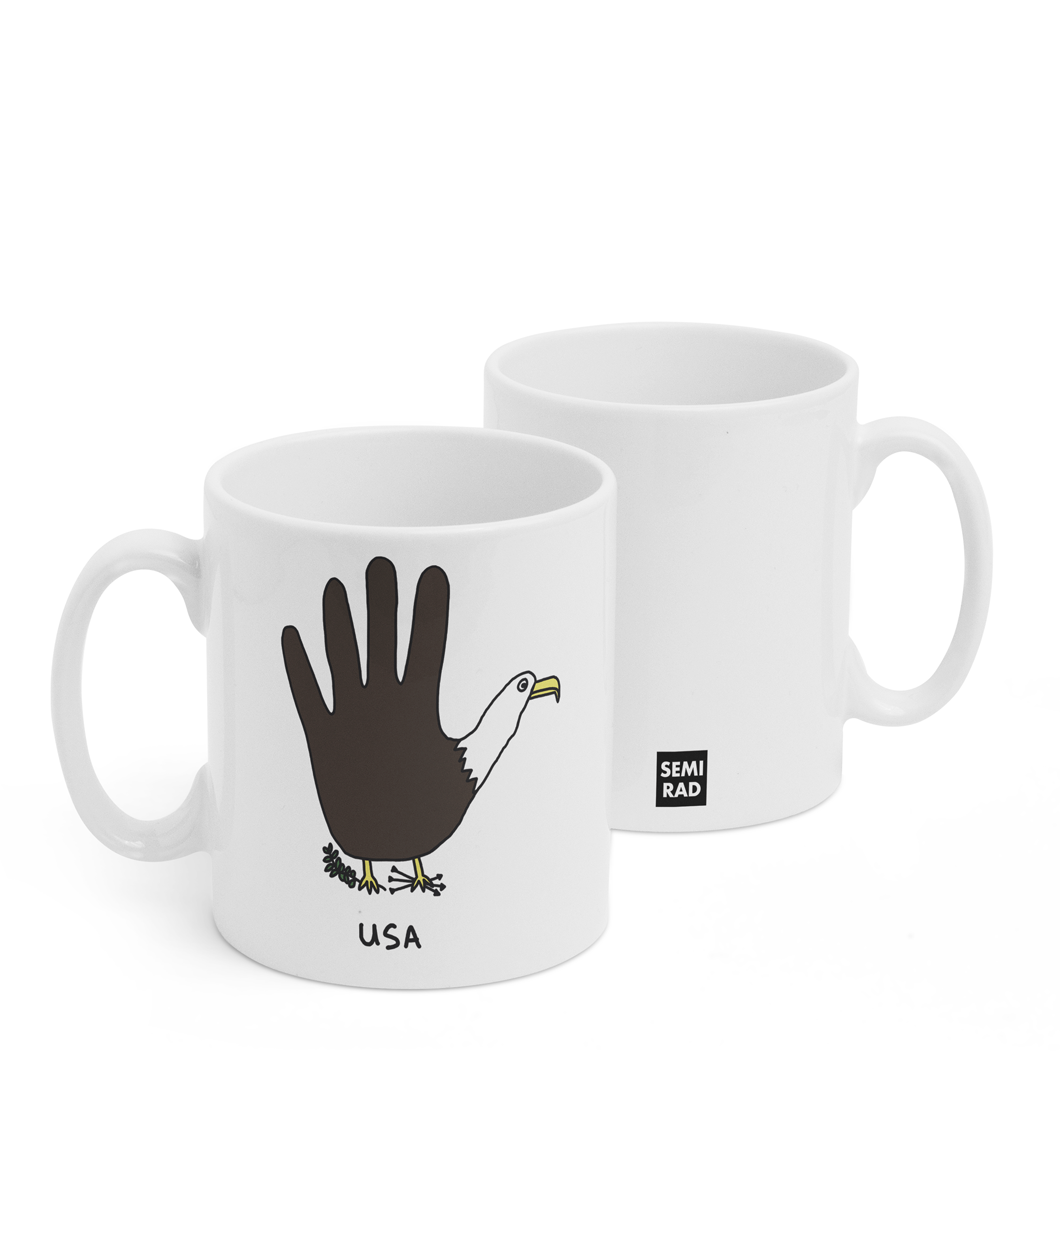 Two white mugs sitting next to each other showing two sides of the same mug. The front side has an illustration of an outline hand that makes a bald eagle with the letters 